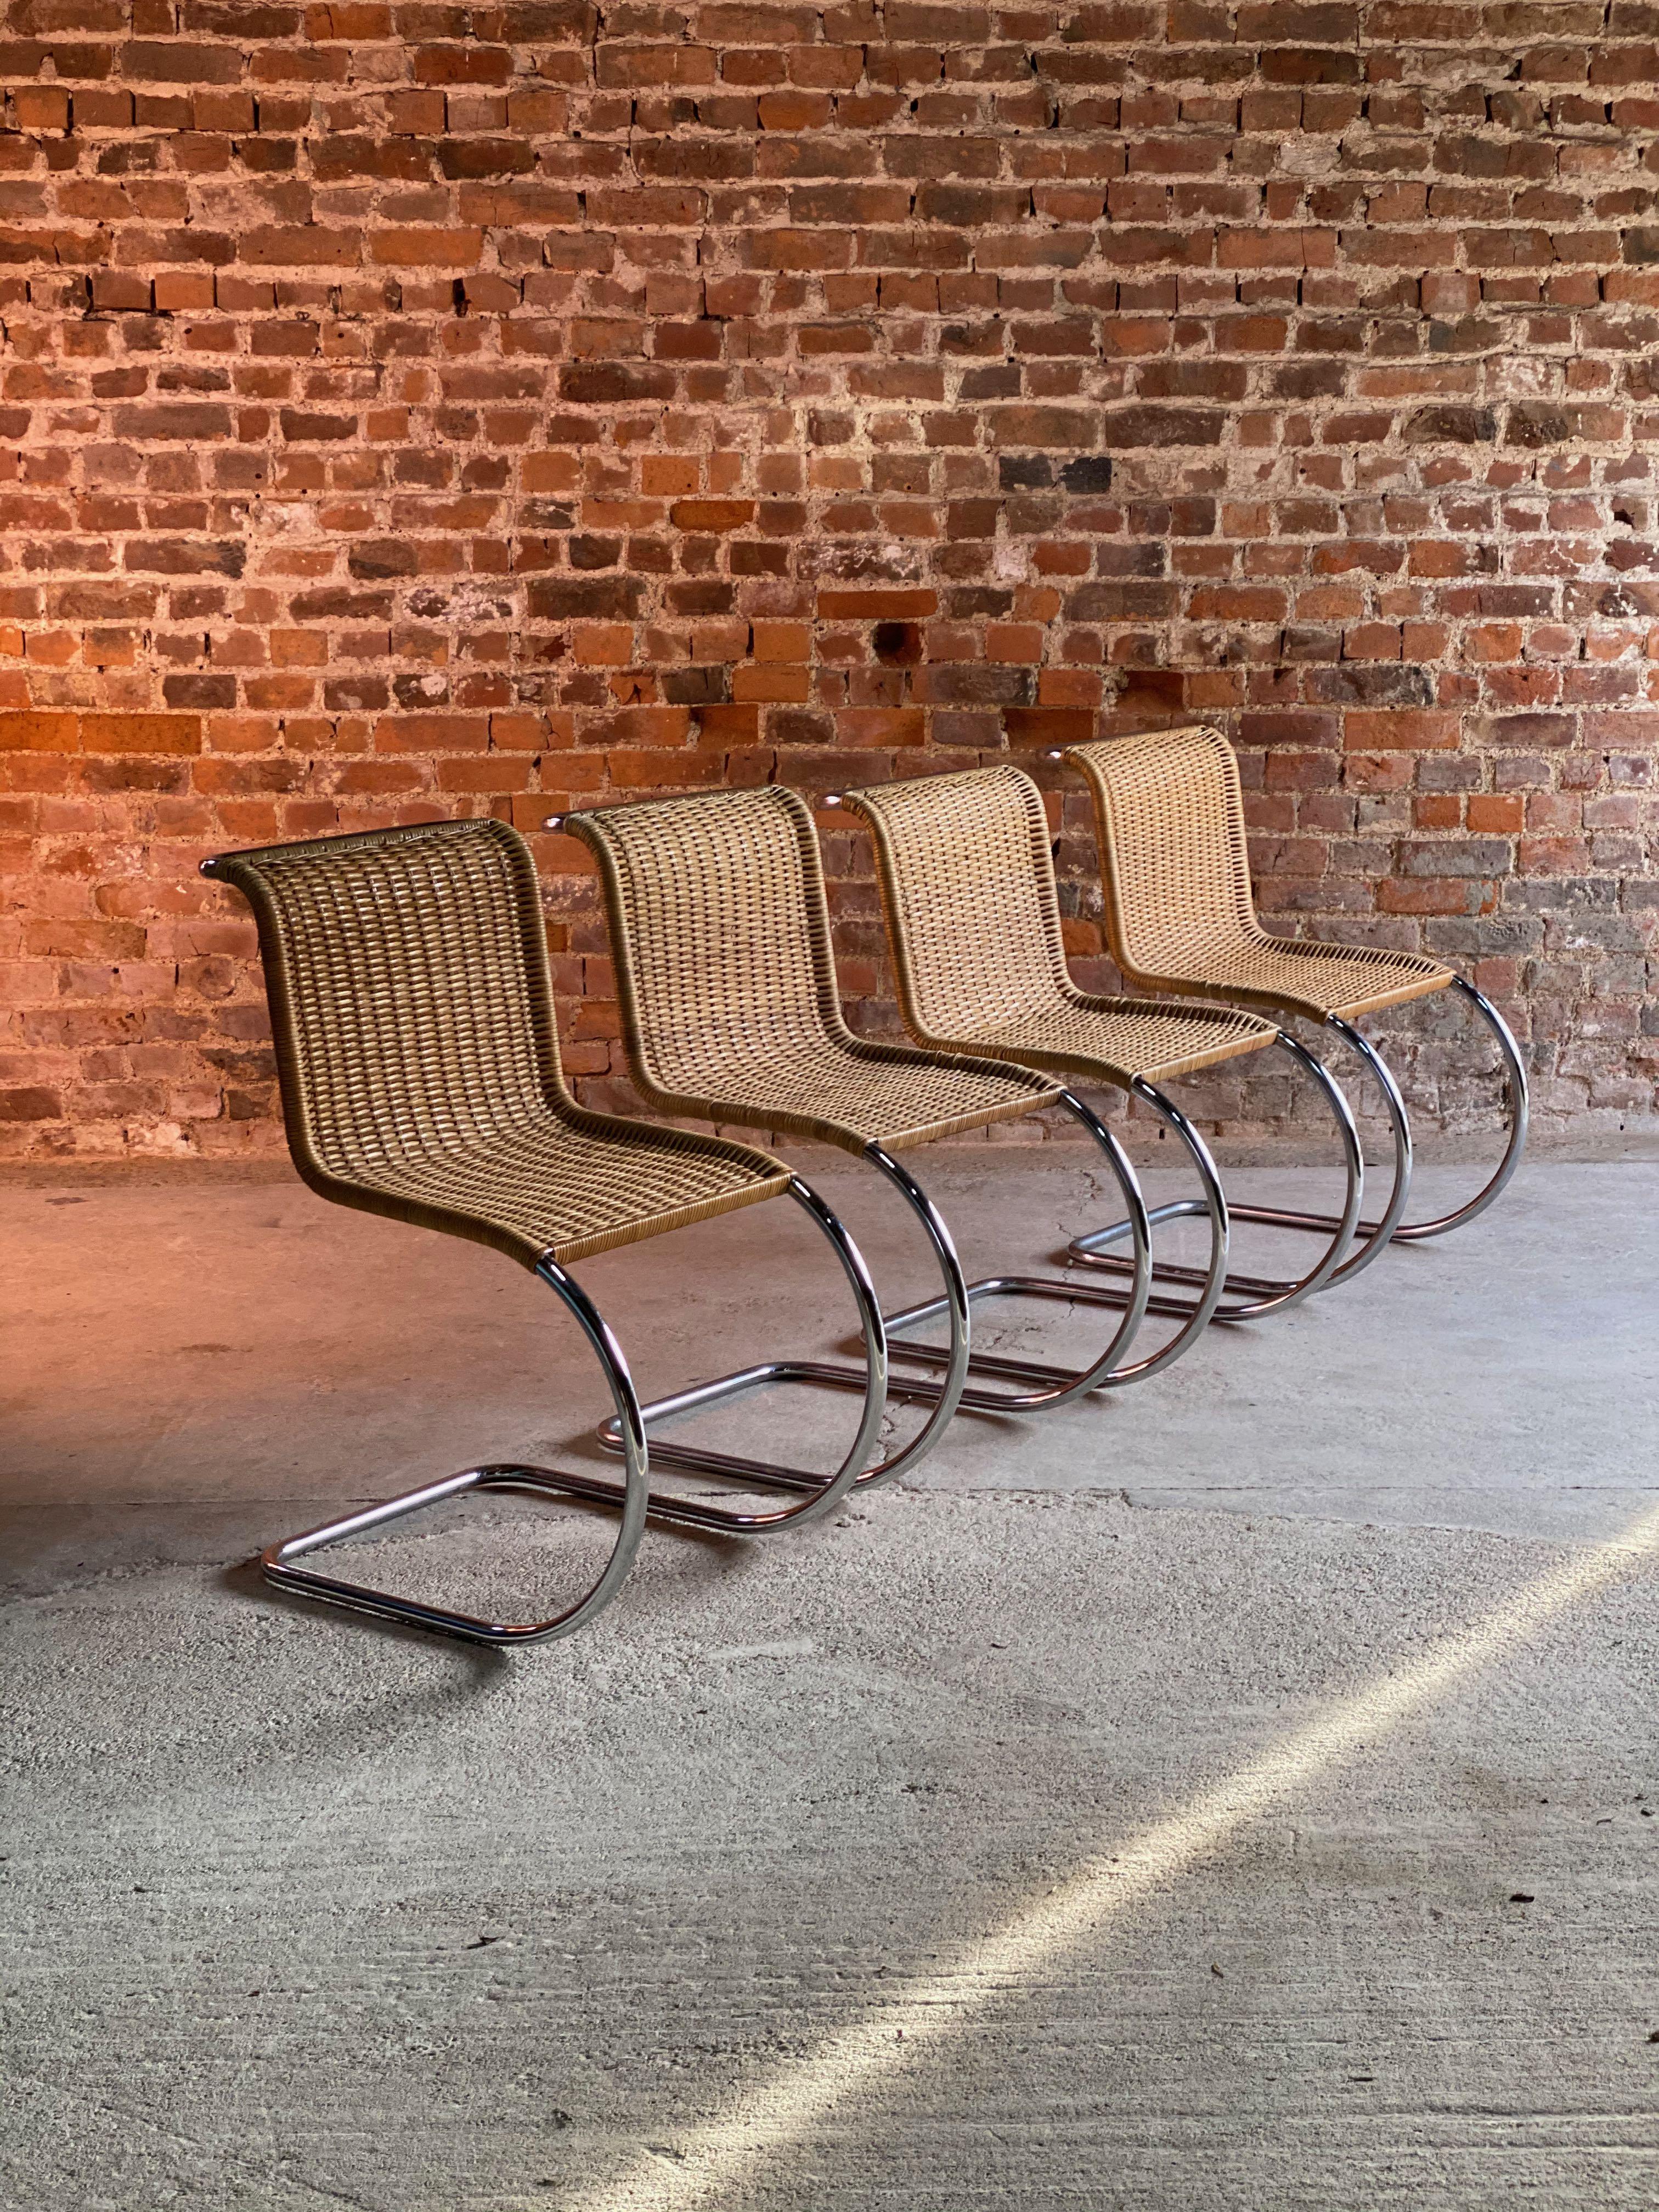 Mies van der Rohe MR10 Rattan Cantilever chairs set of four by Knoll Original circa 1970

MR10 rattan and chrome Cantilever dining chairs by Ludwig Mies van der Rohe for Knoll circa 1970s. A rare opportunity to find a matching set of four iconic